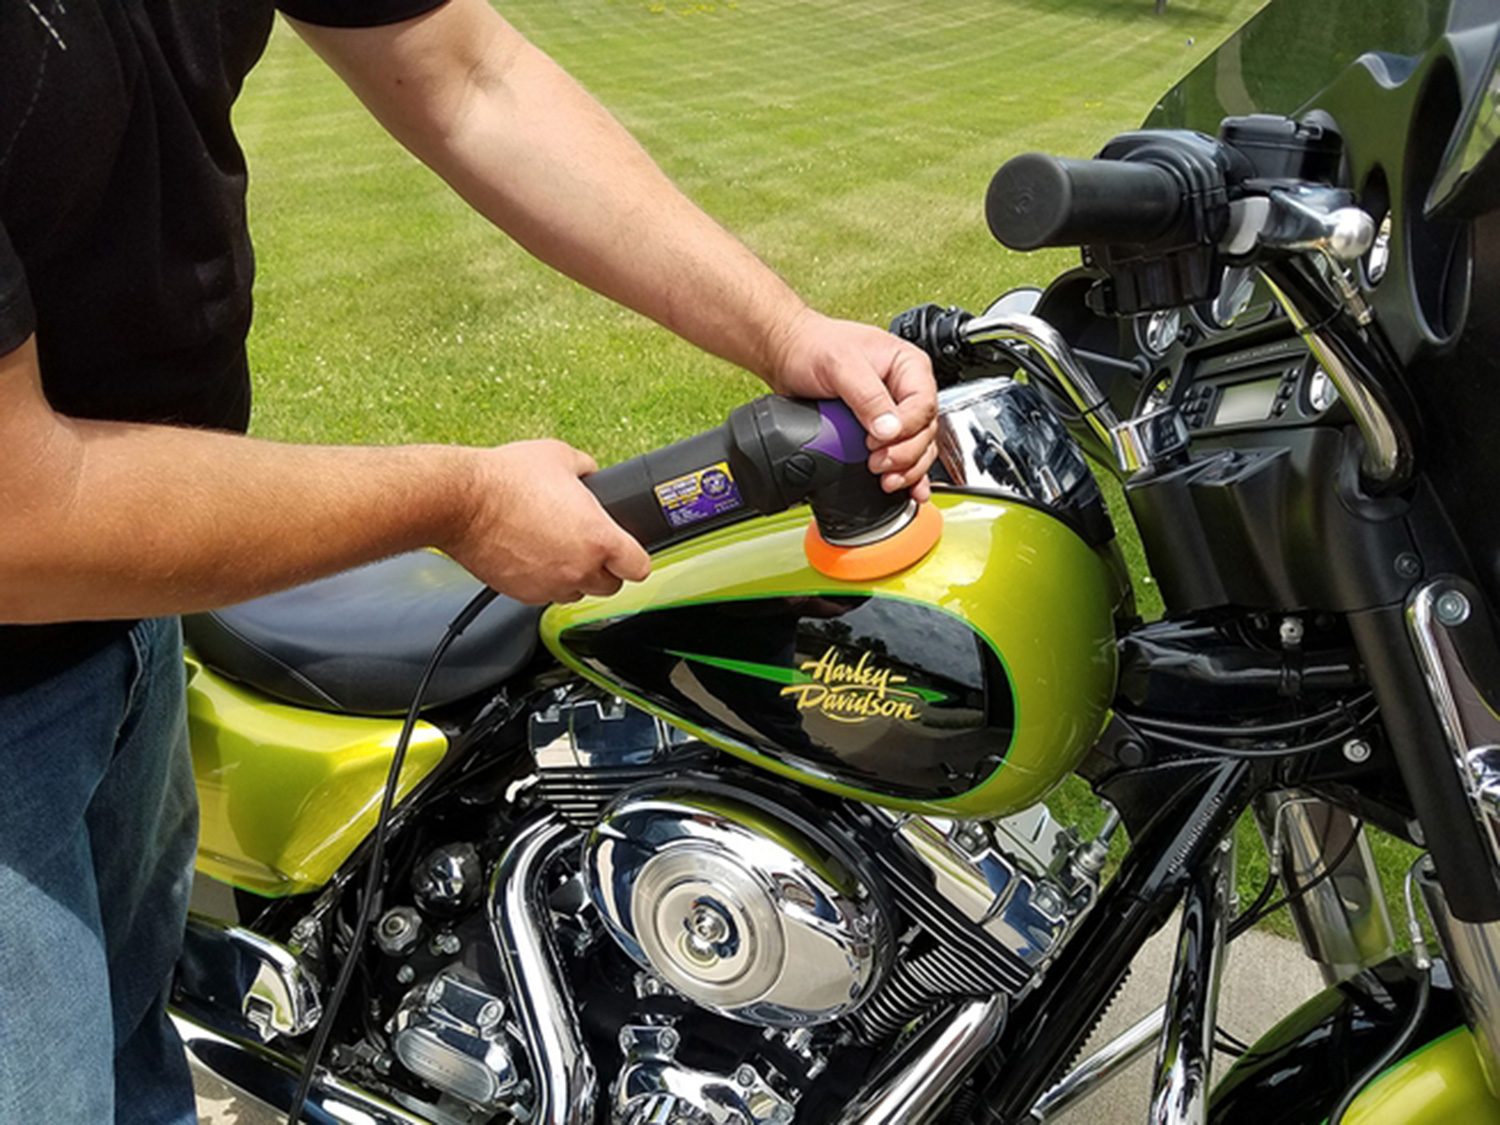 Motorcycle Cleaning & Bike Care